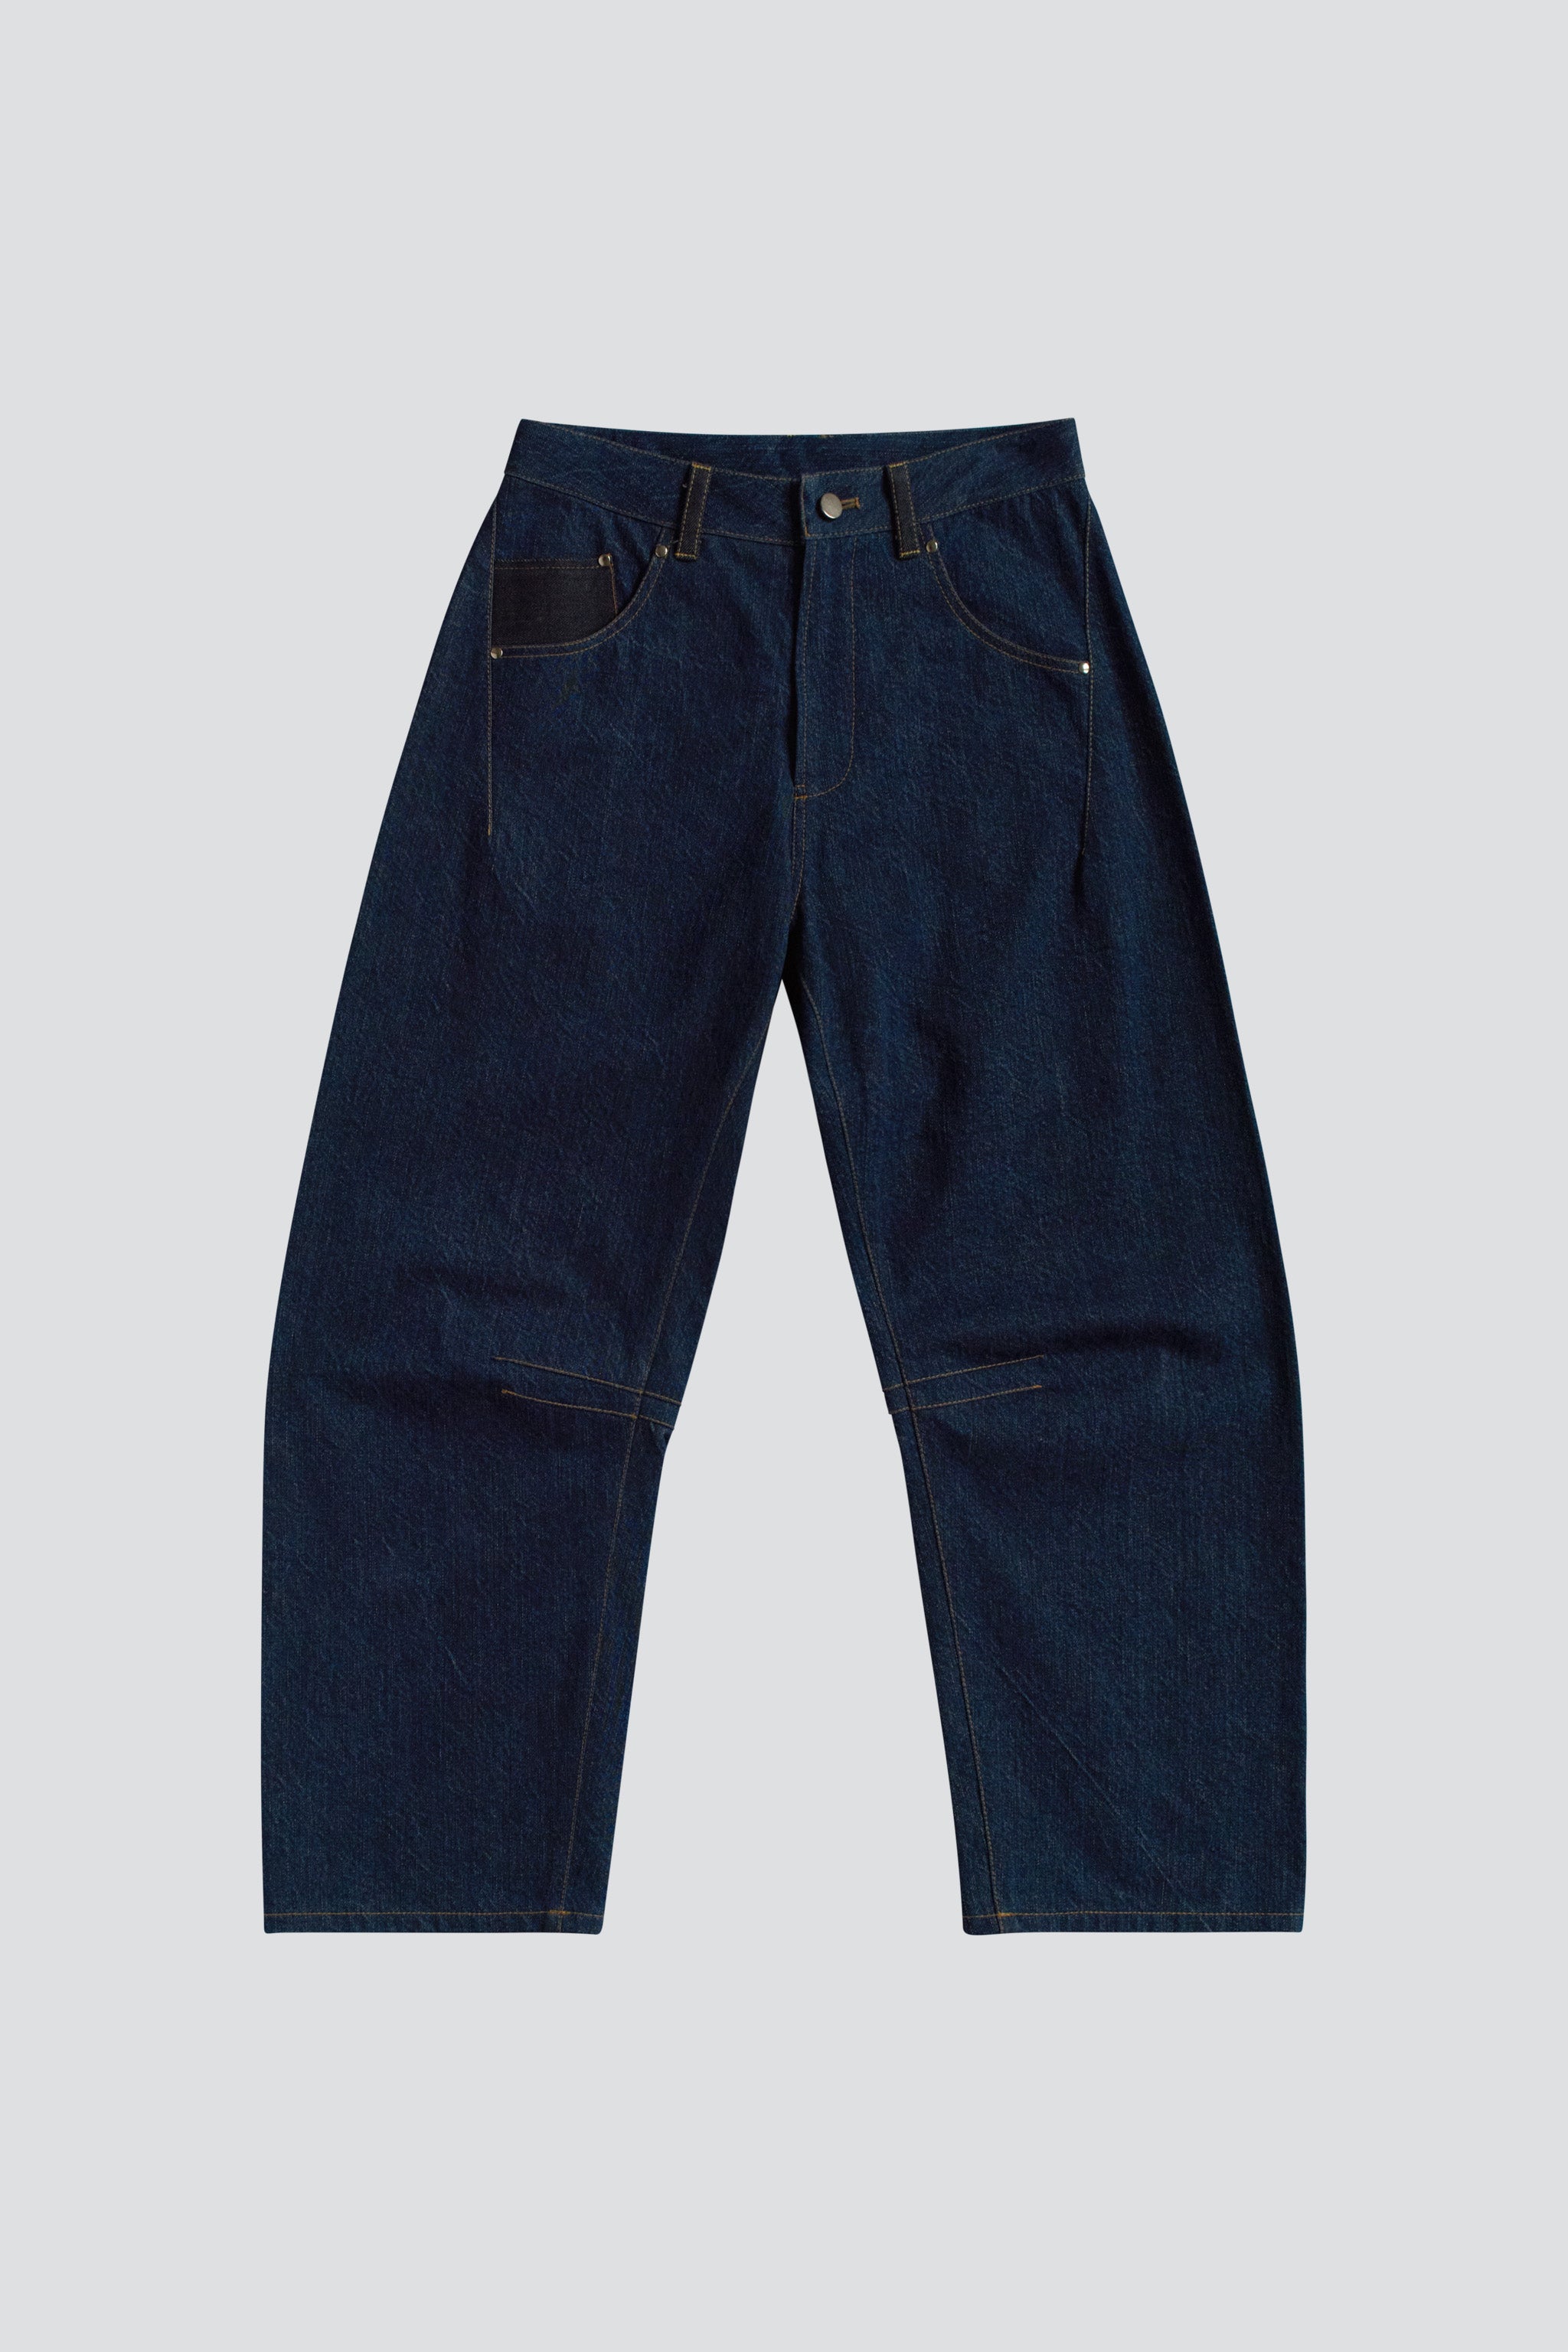 Indigo Curved Leg Relaxed Jean